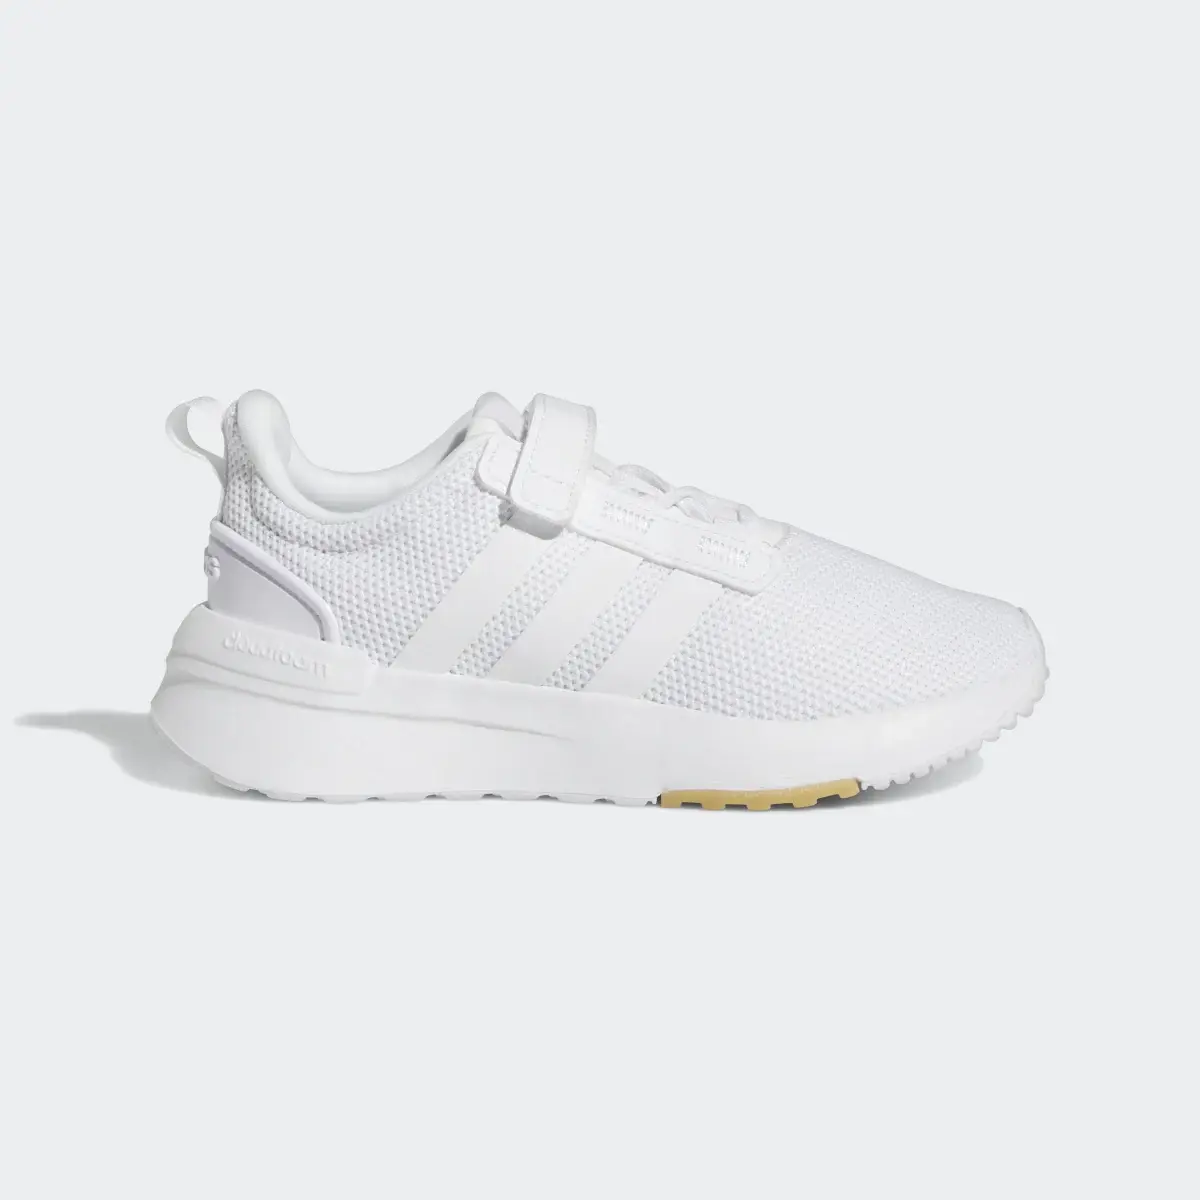 Adidas Racer TR21 Shoes. 2